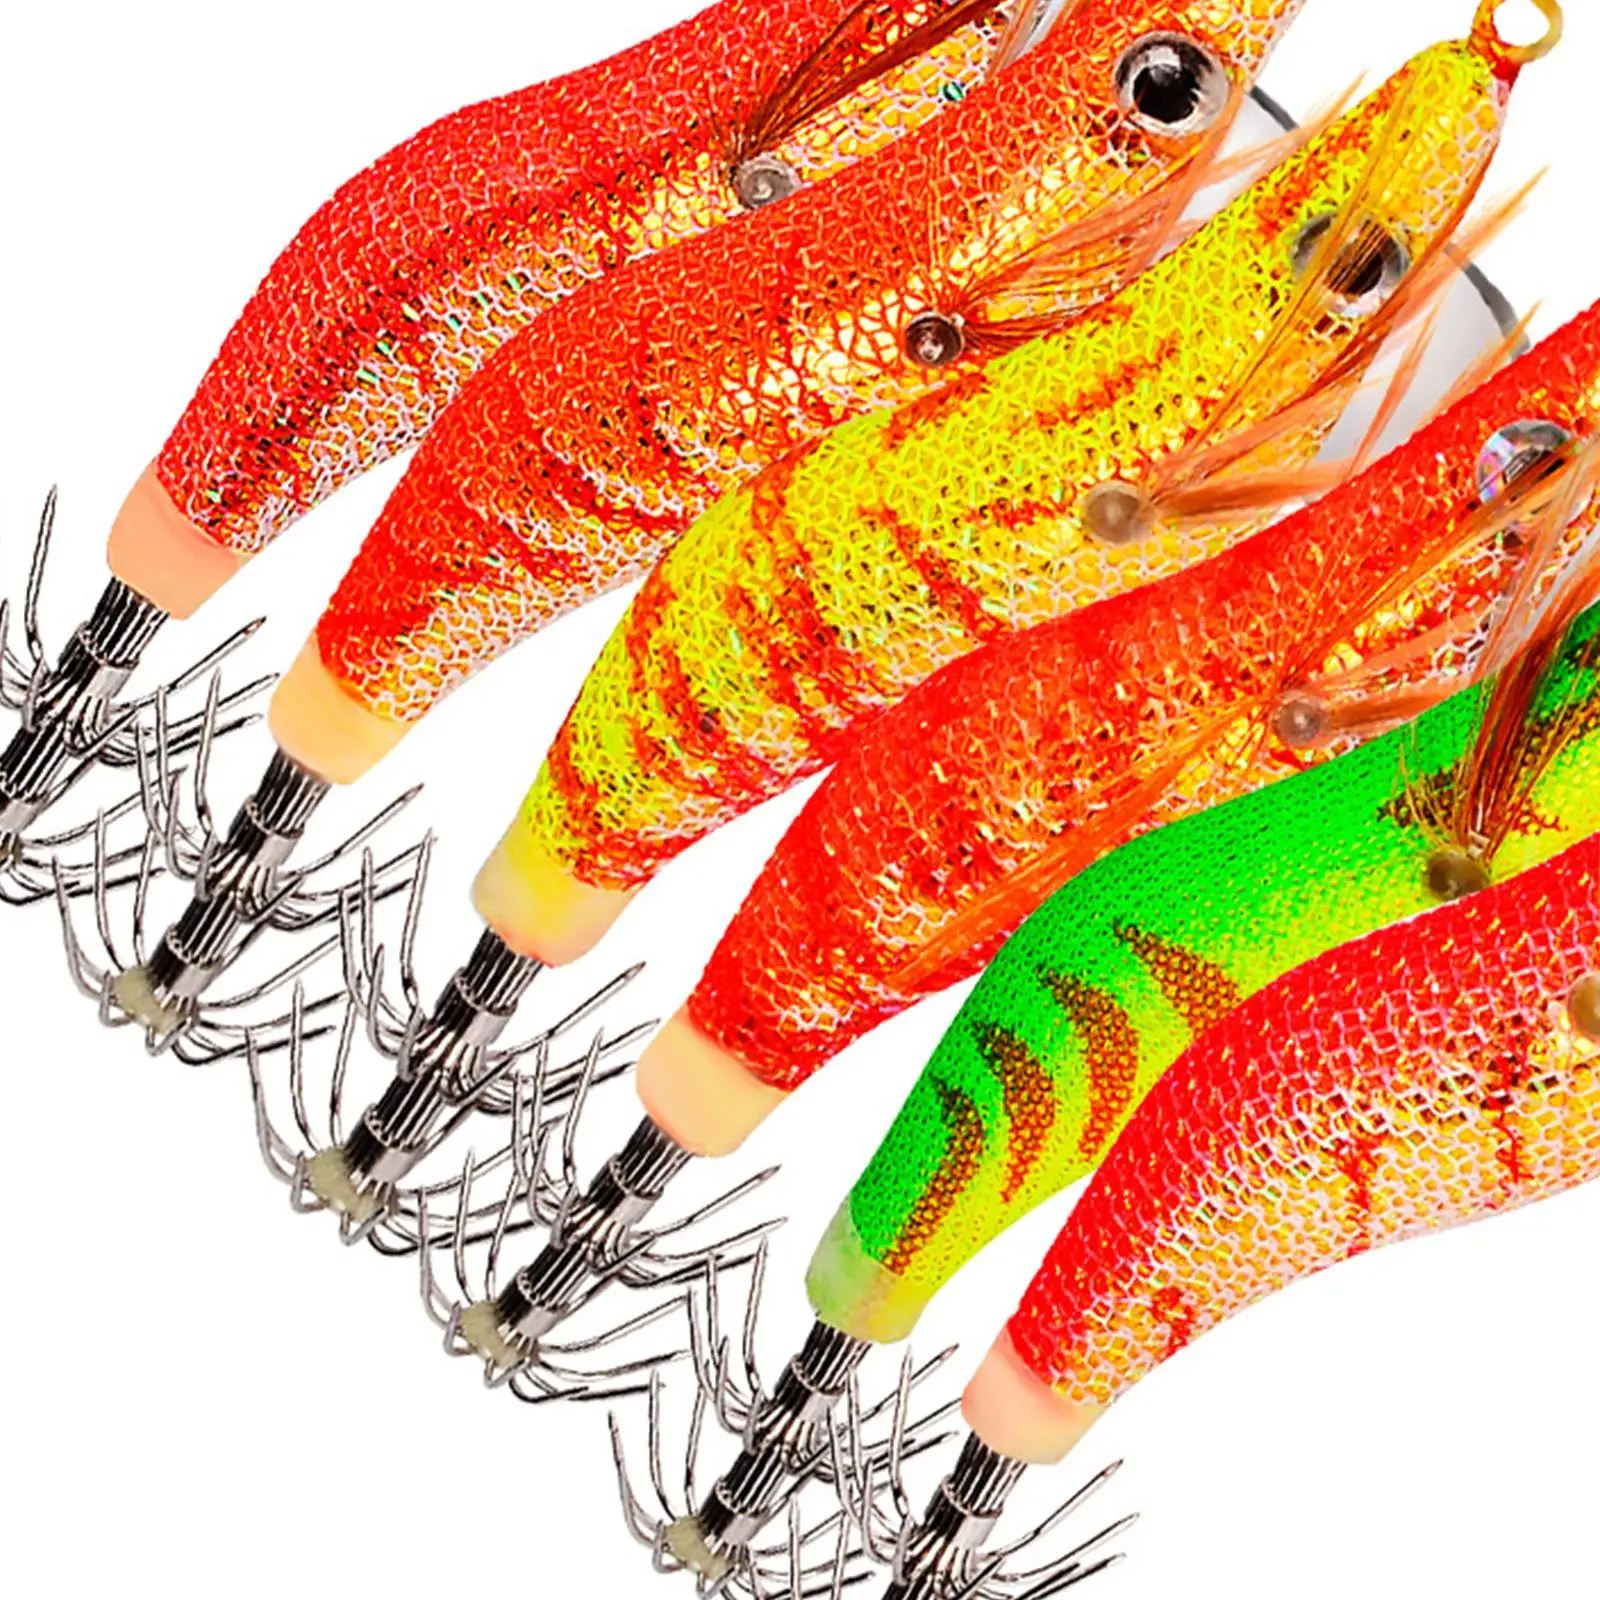 6 Pieces Squid Jig Hook Hard Fishing Lures Prawn Lures for Octopus Freshwater Fishing Sea Fishing Squid Fishing Cuttlefish